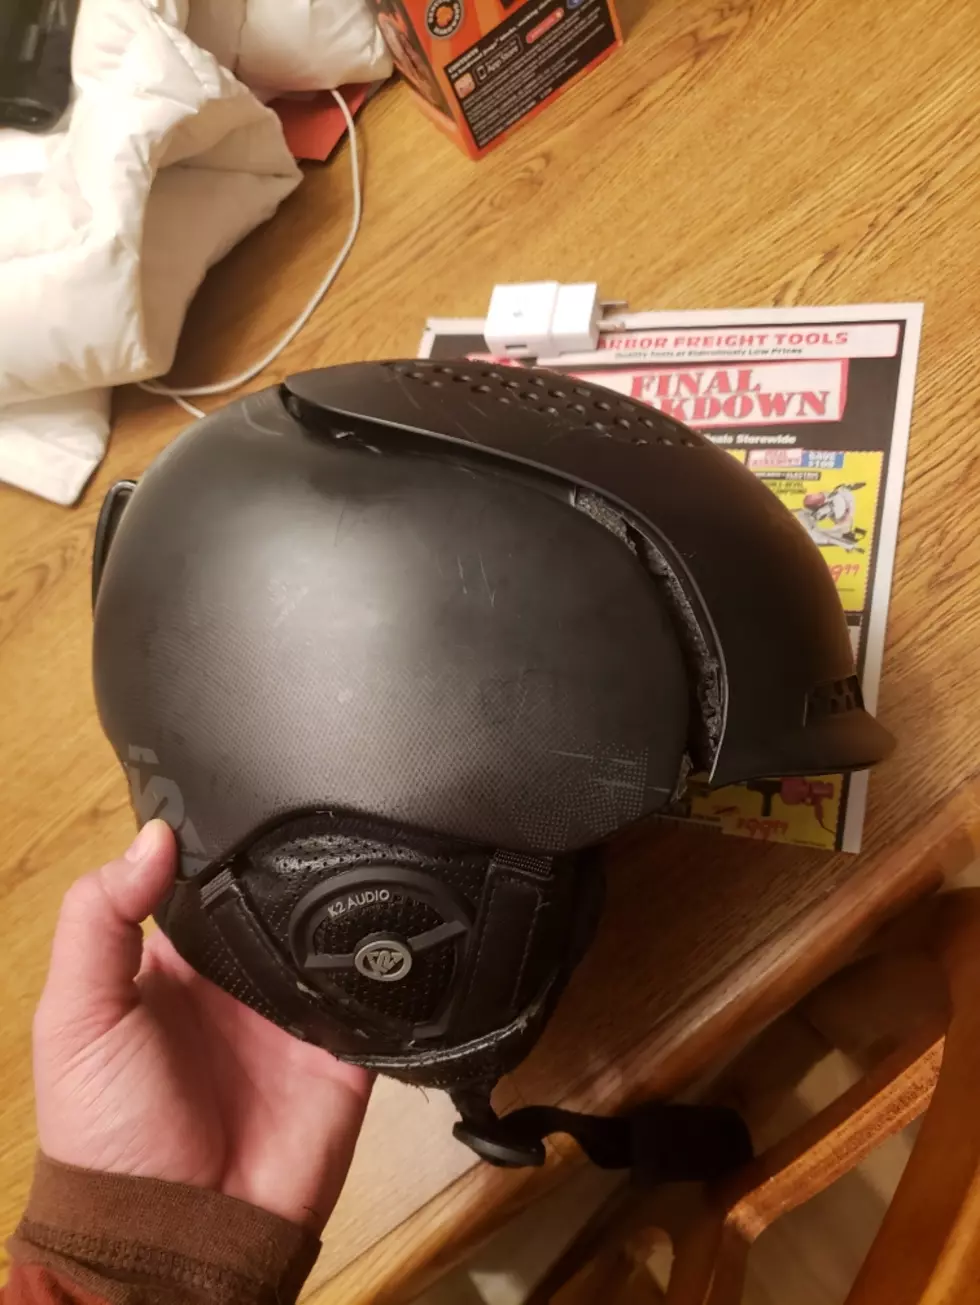 A Helmet Saved Our Coworkers Life